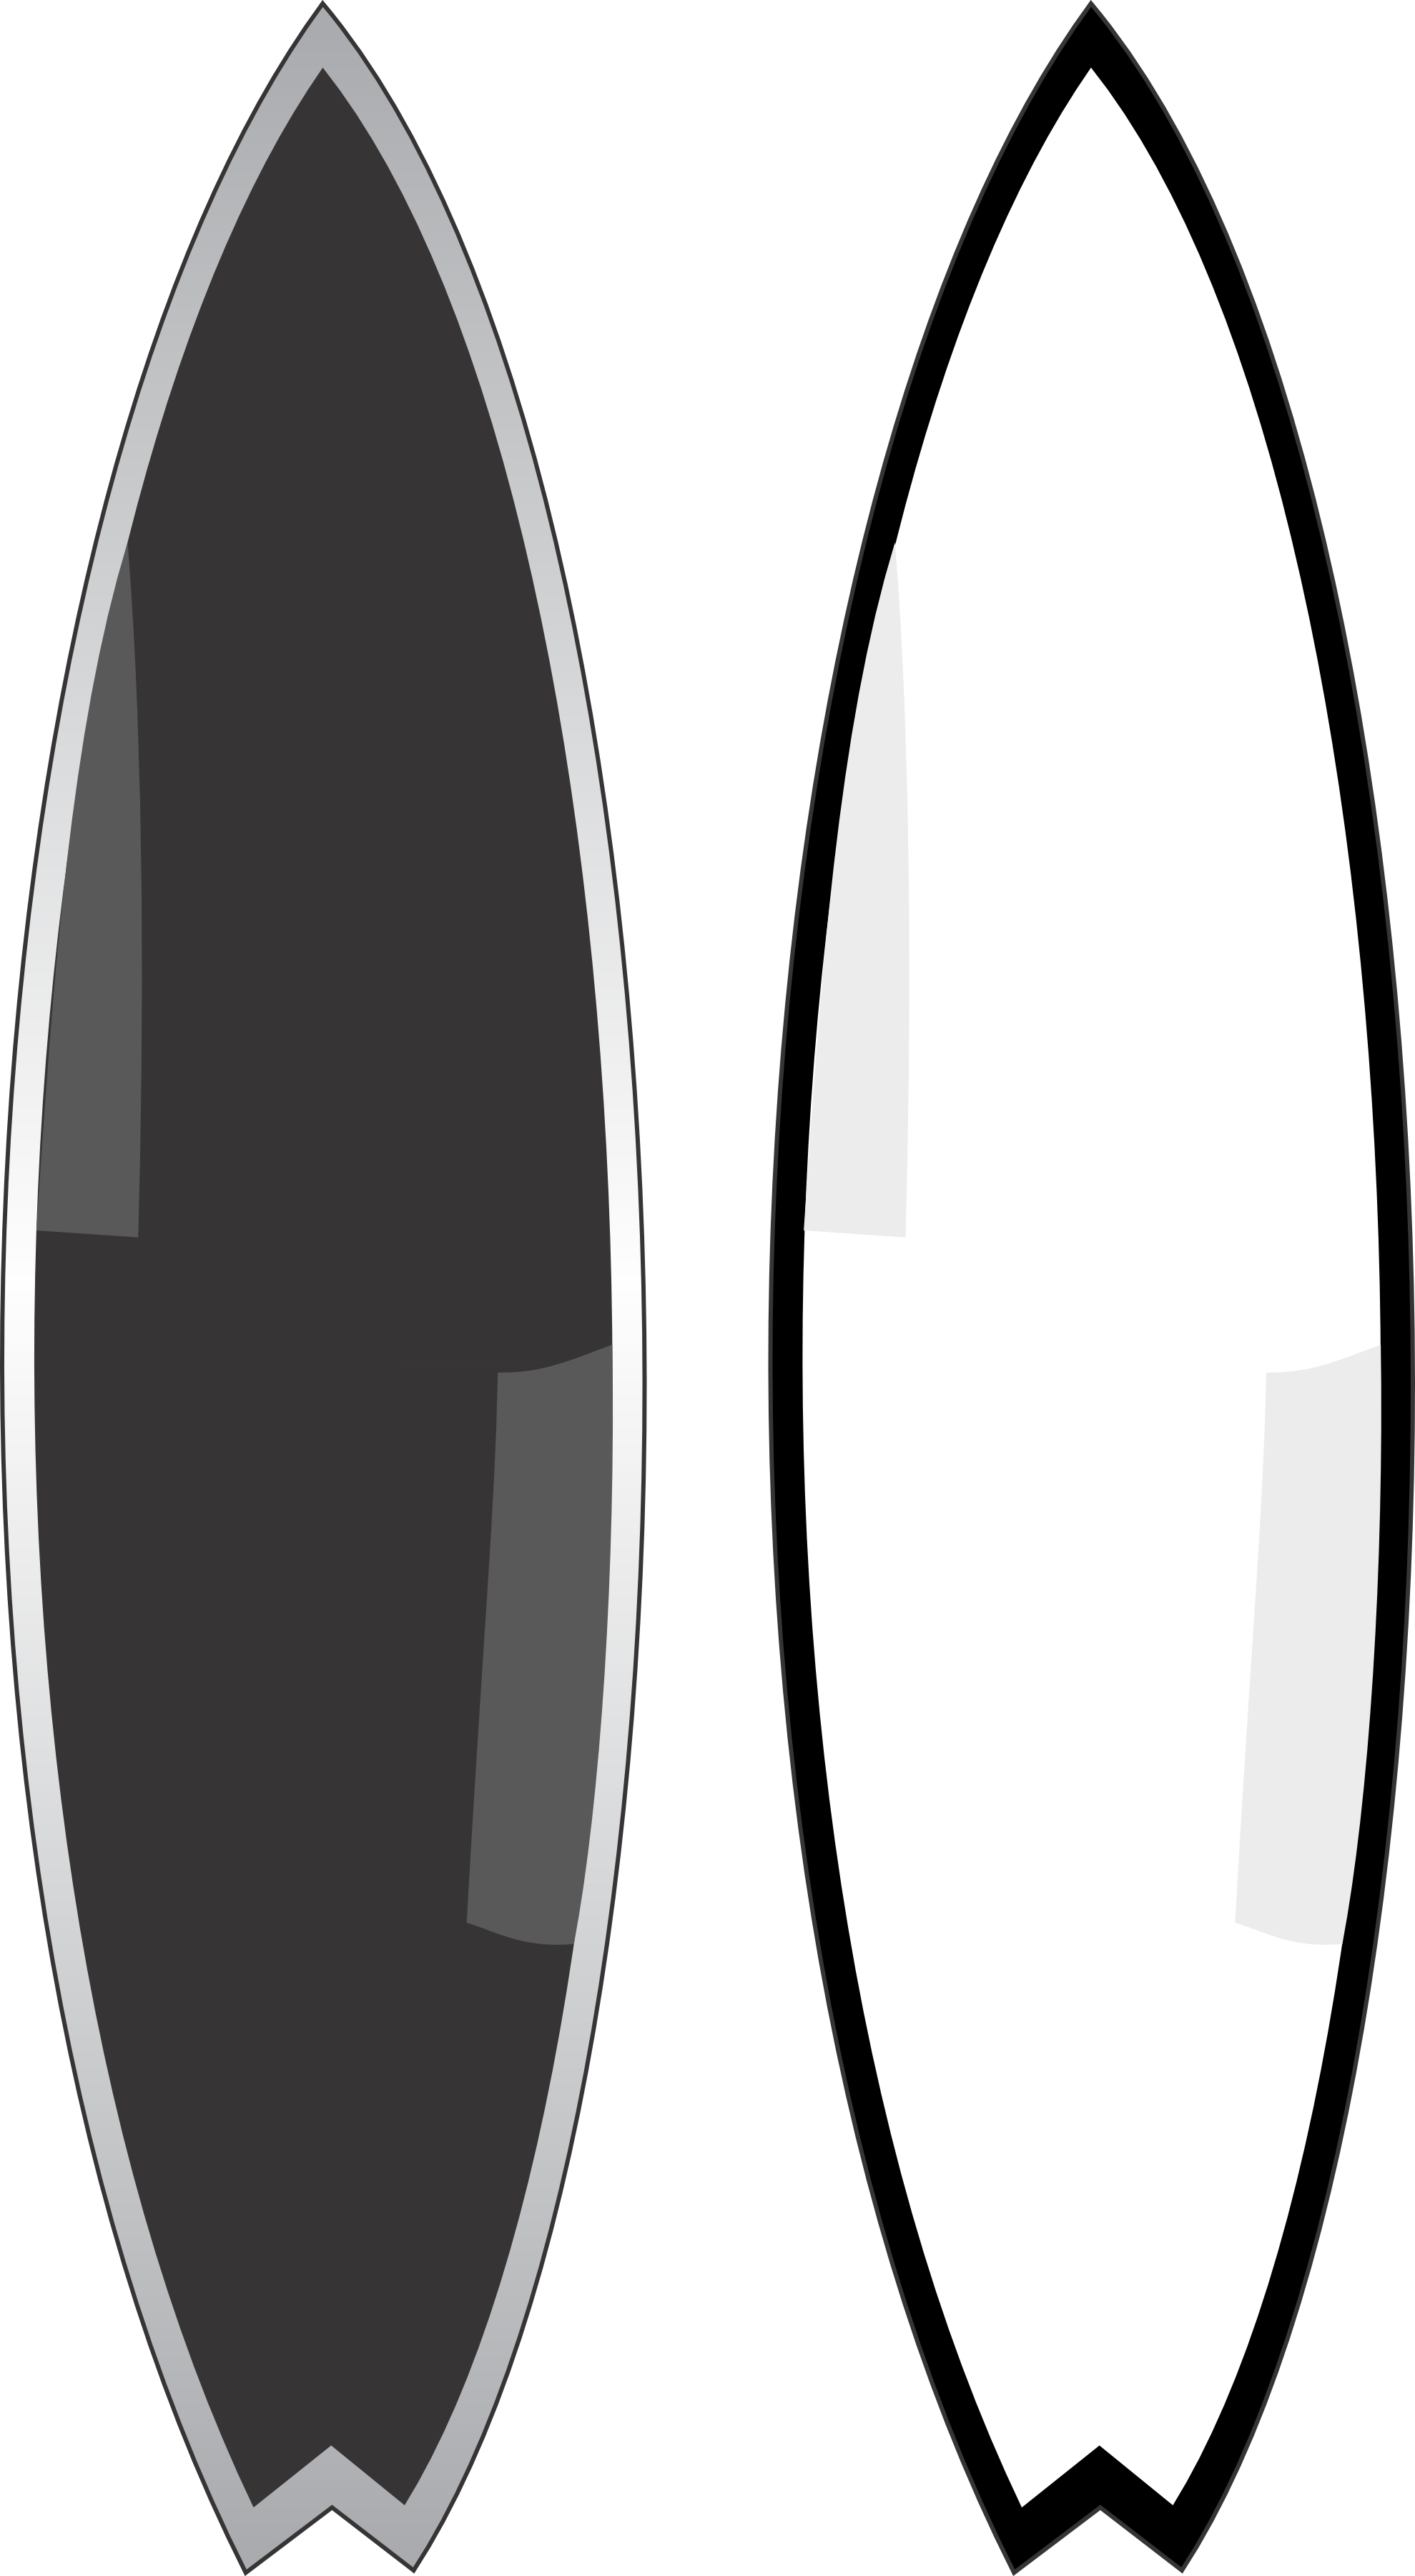 Surf Board Template Black And White - ClipArt Best